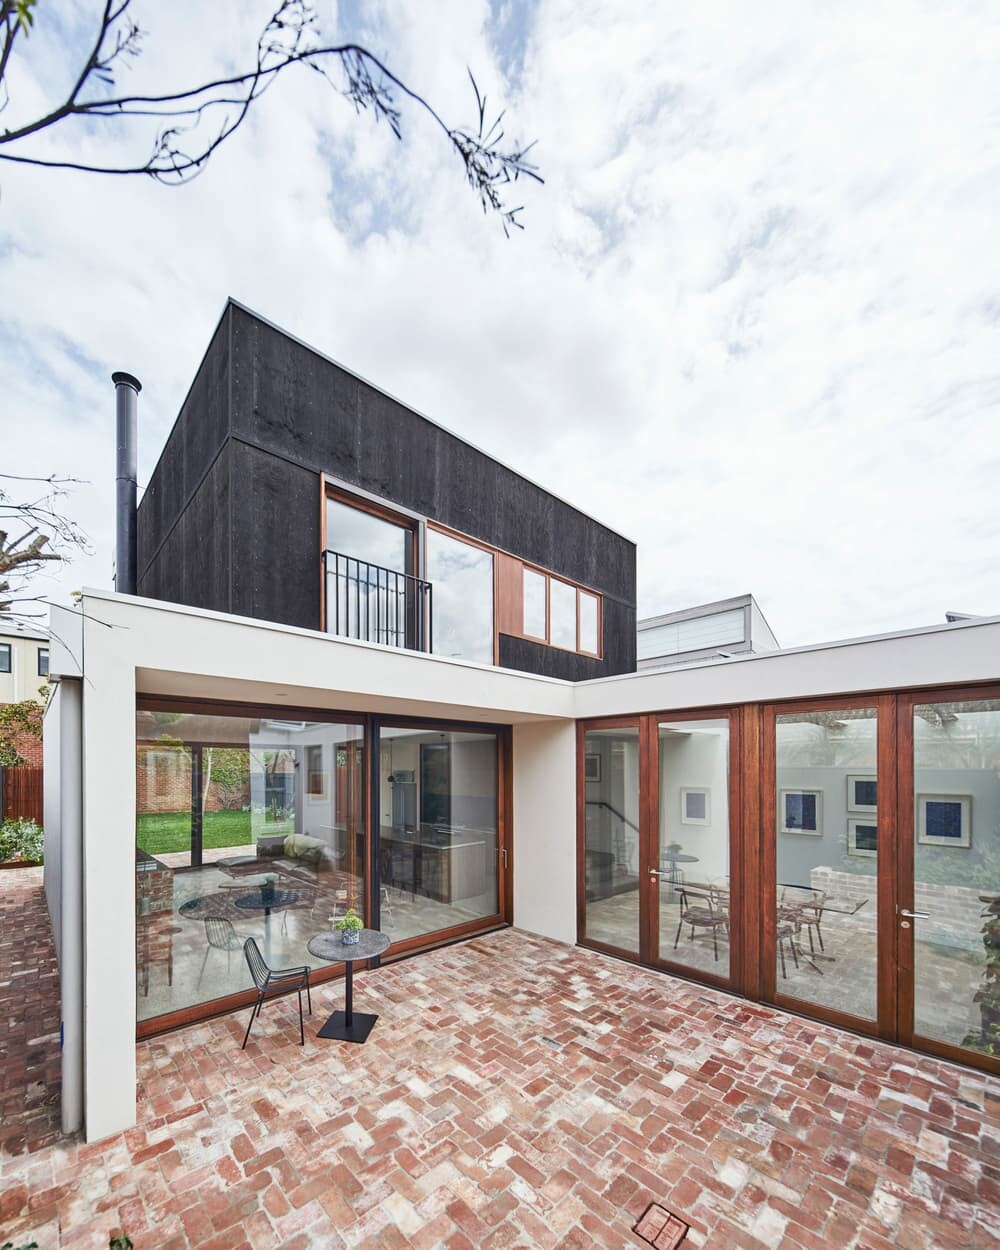 Field Office Architecture Completed an Open-Plan Addition to a Heritage Home